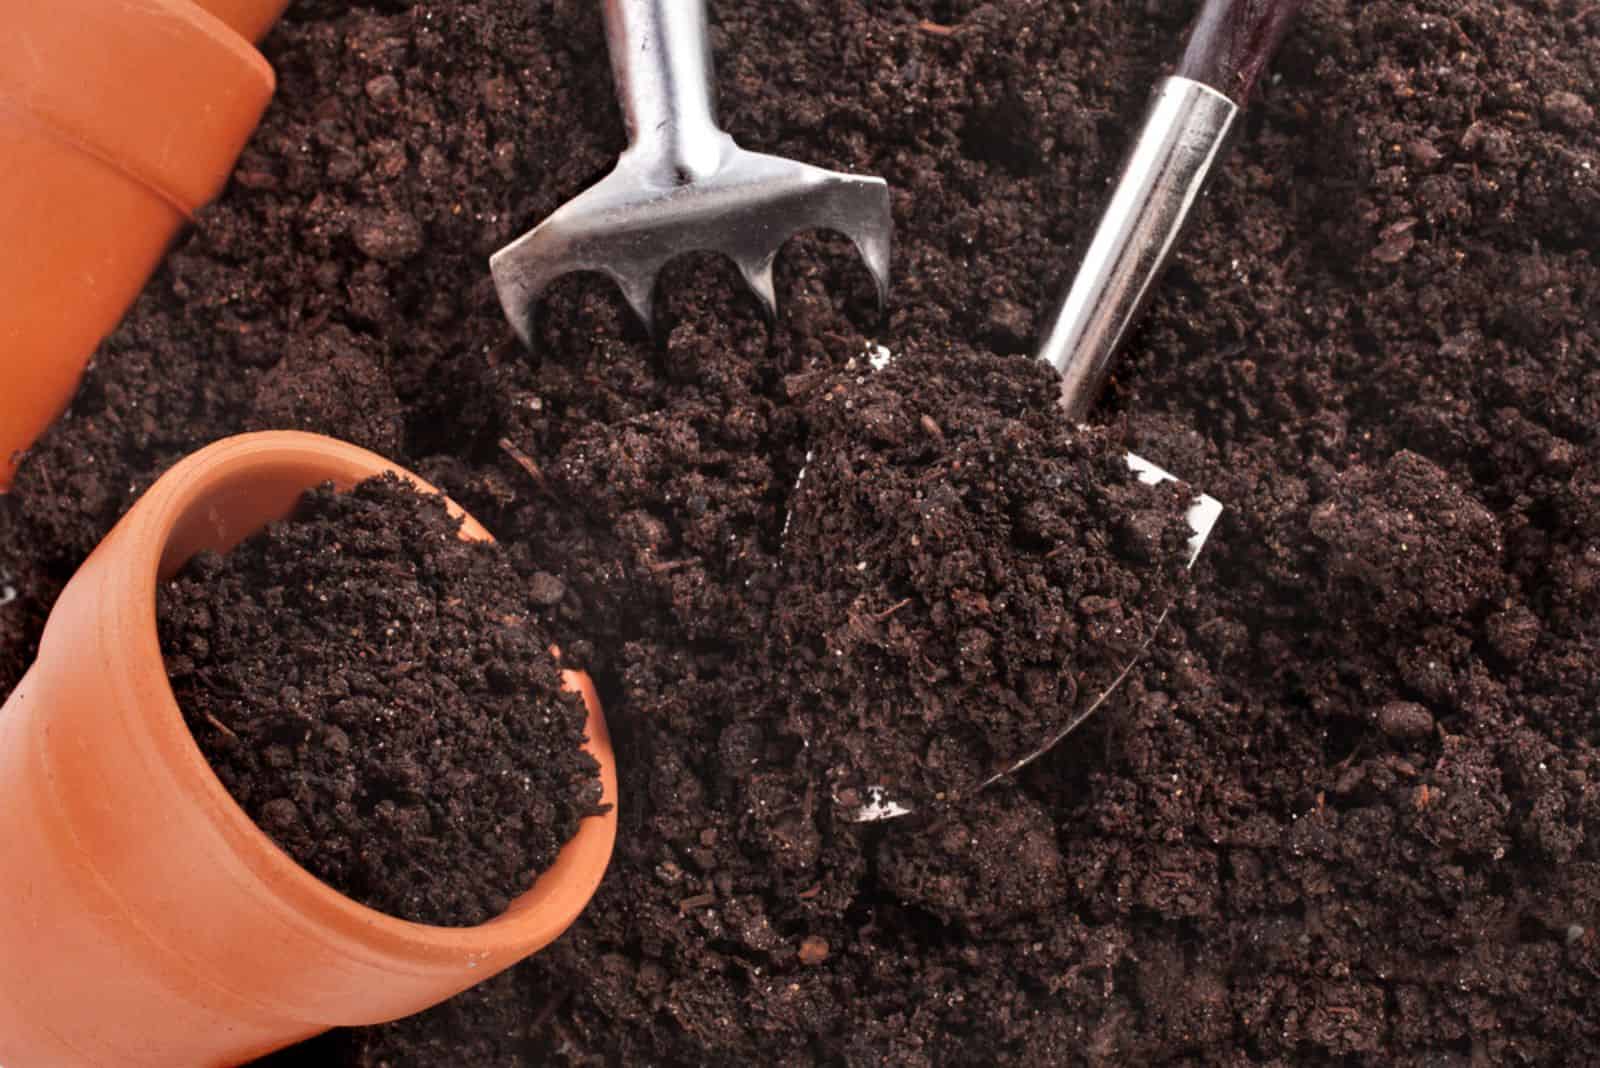 gardening tools and seedling in soil surface background